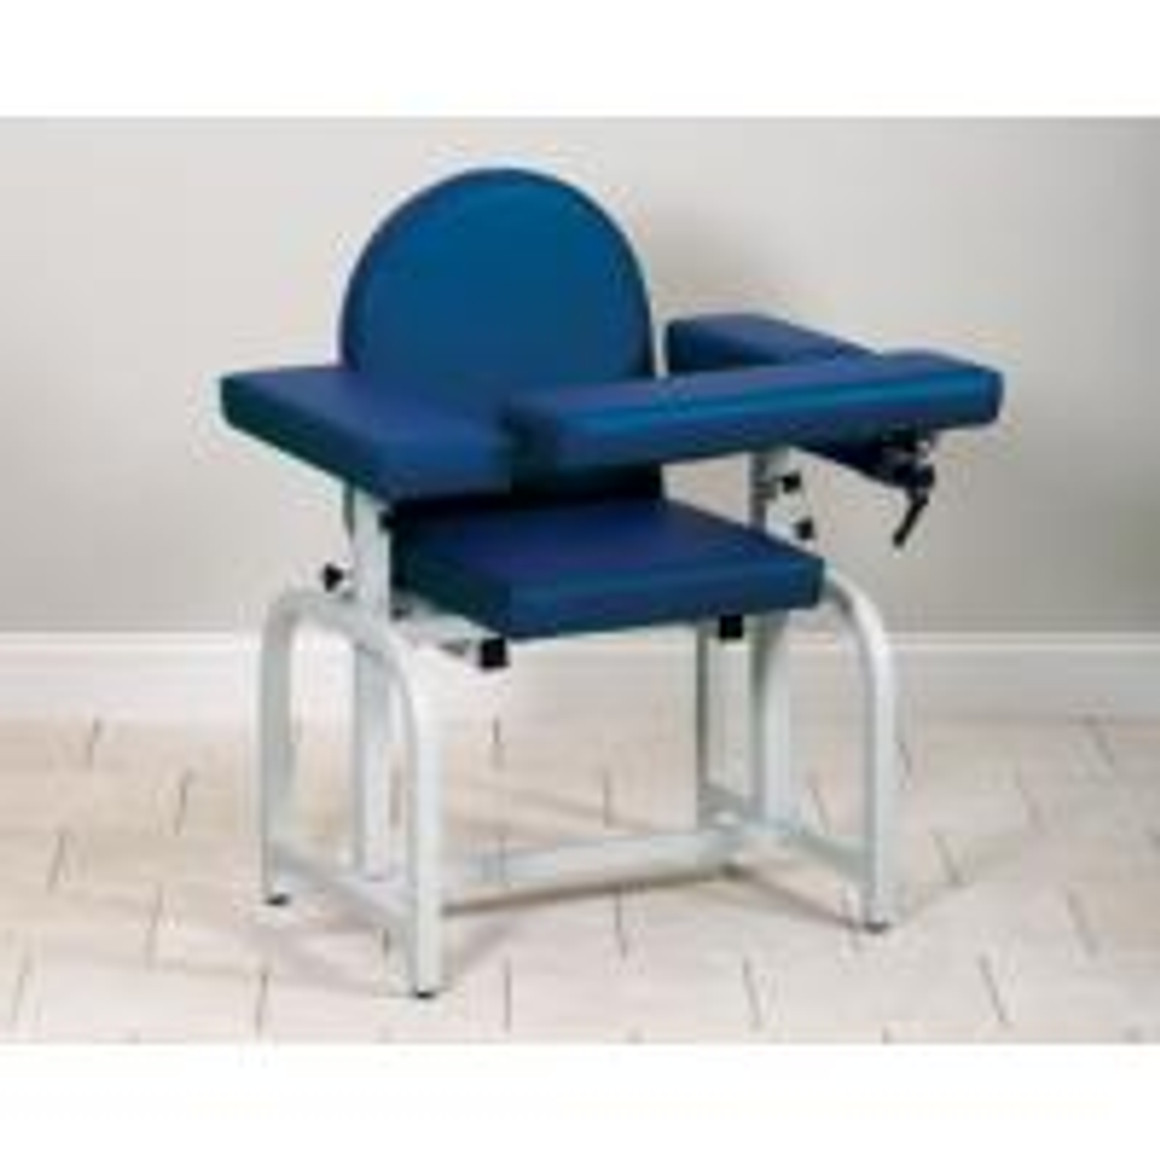 Clinton Lab X Series Blood Drawing Chair with Flip-Arm, Burgundy